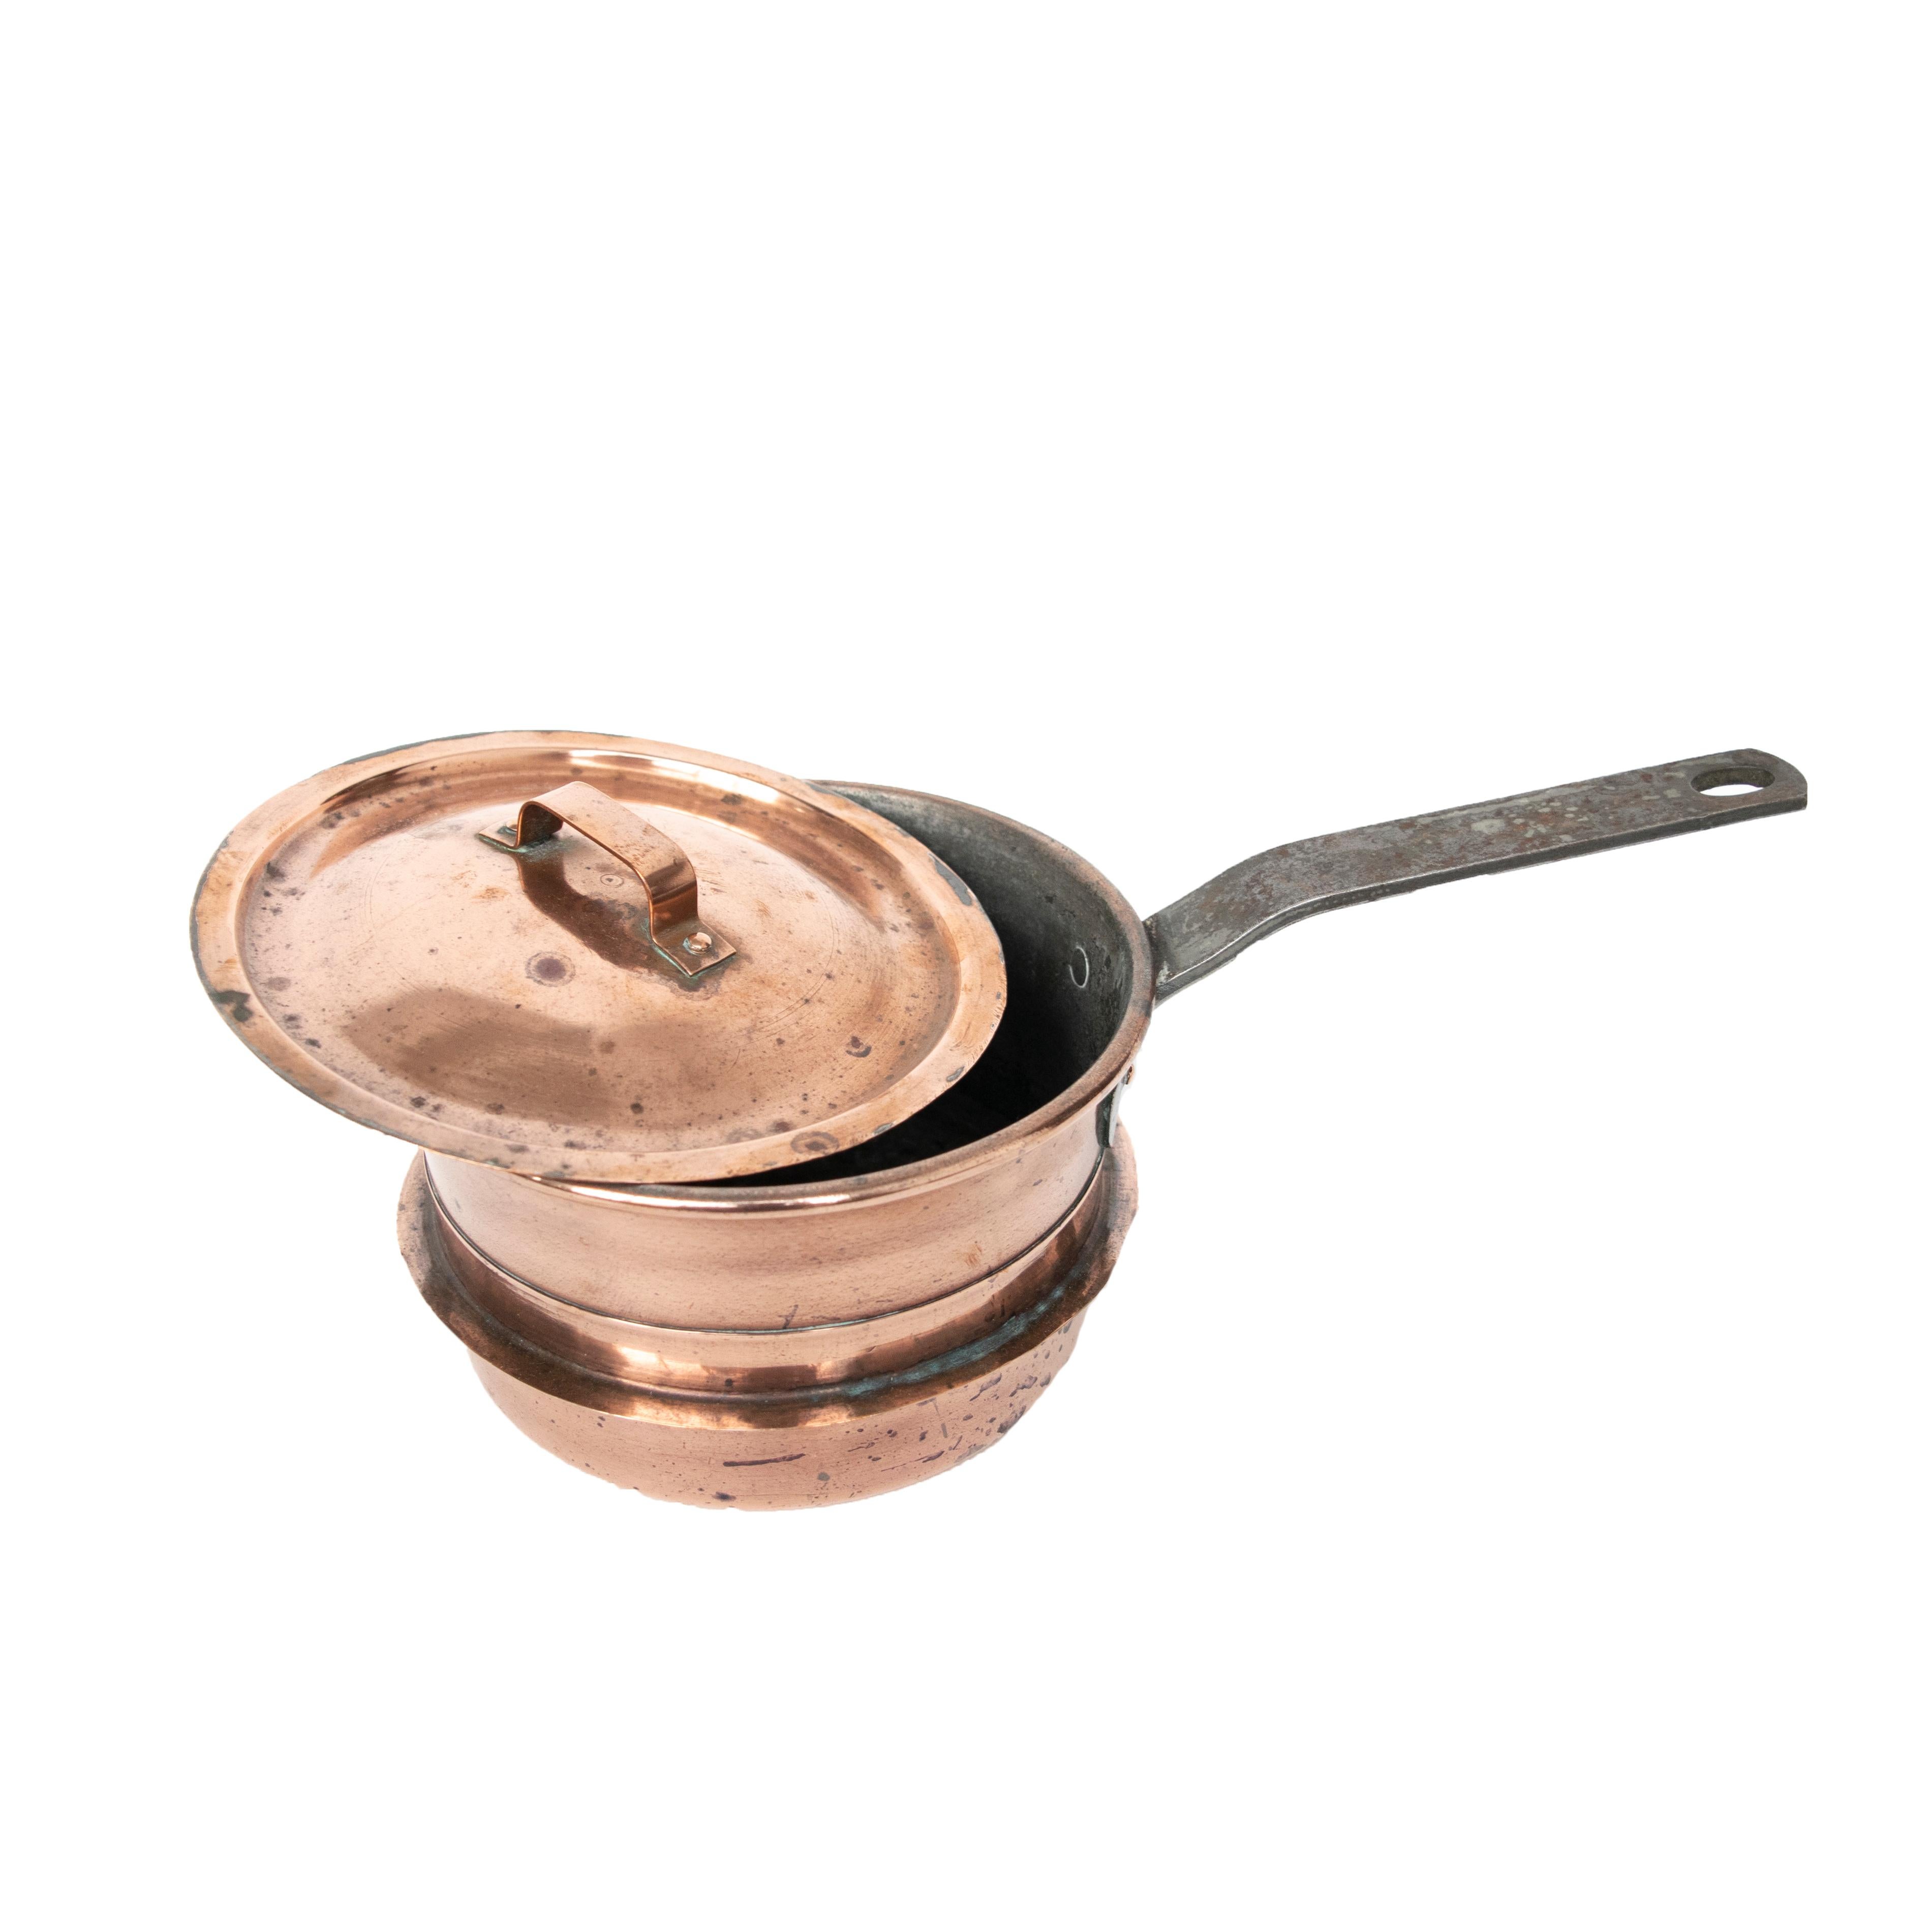 Antique Copper Saucepan with Cast Iron Handle, Small Size from Sweden Late 1800 In Fair Condition For Sale In Singapore, SG